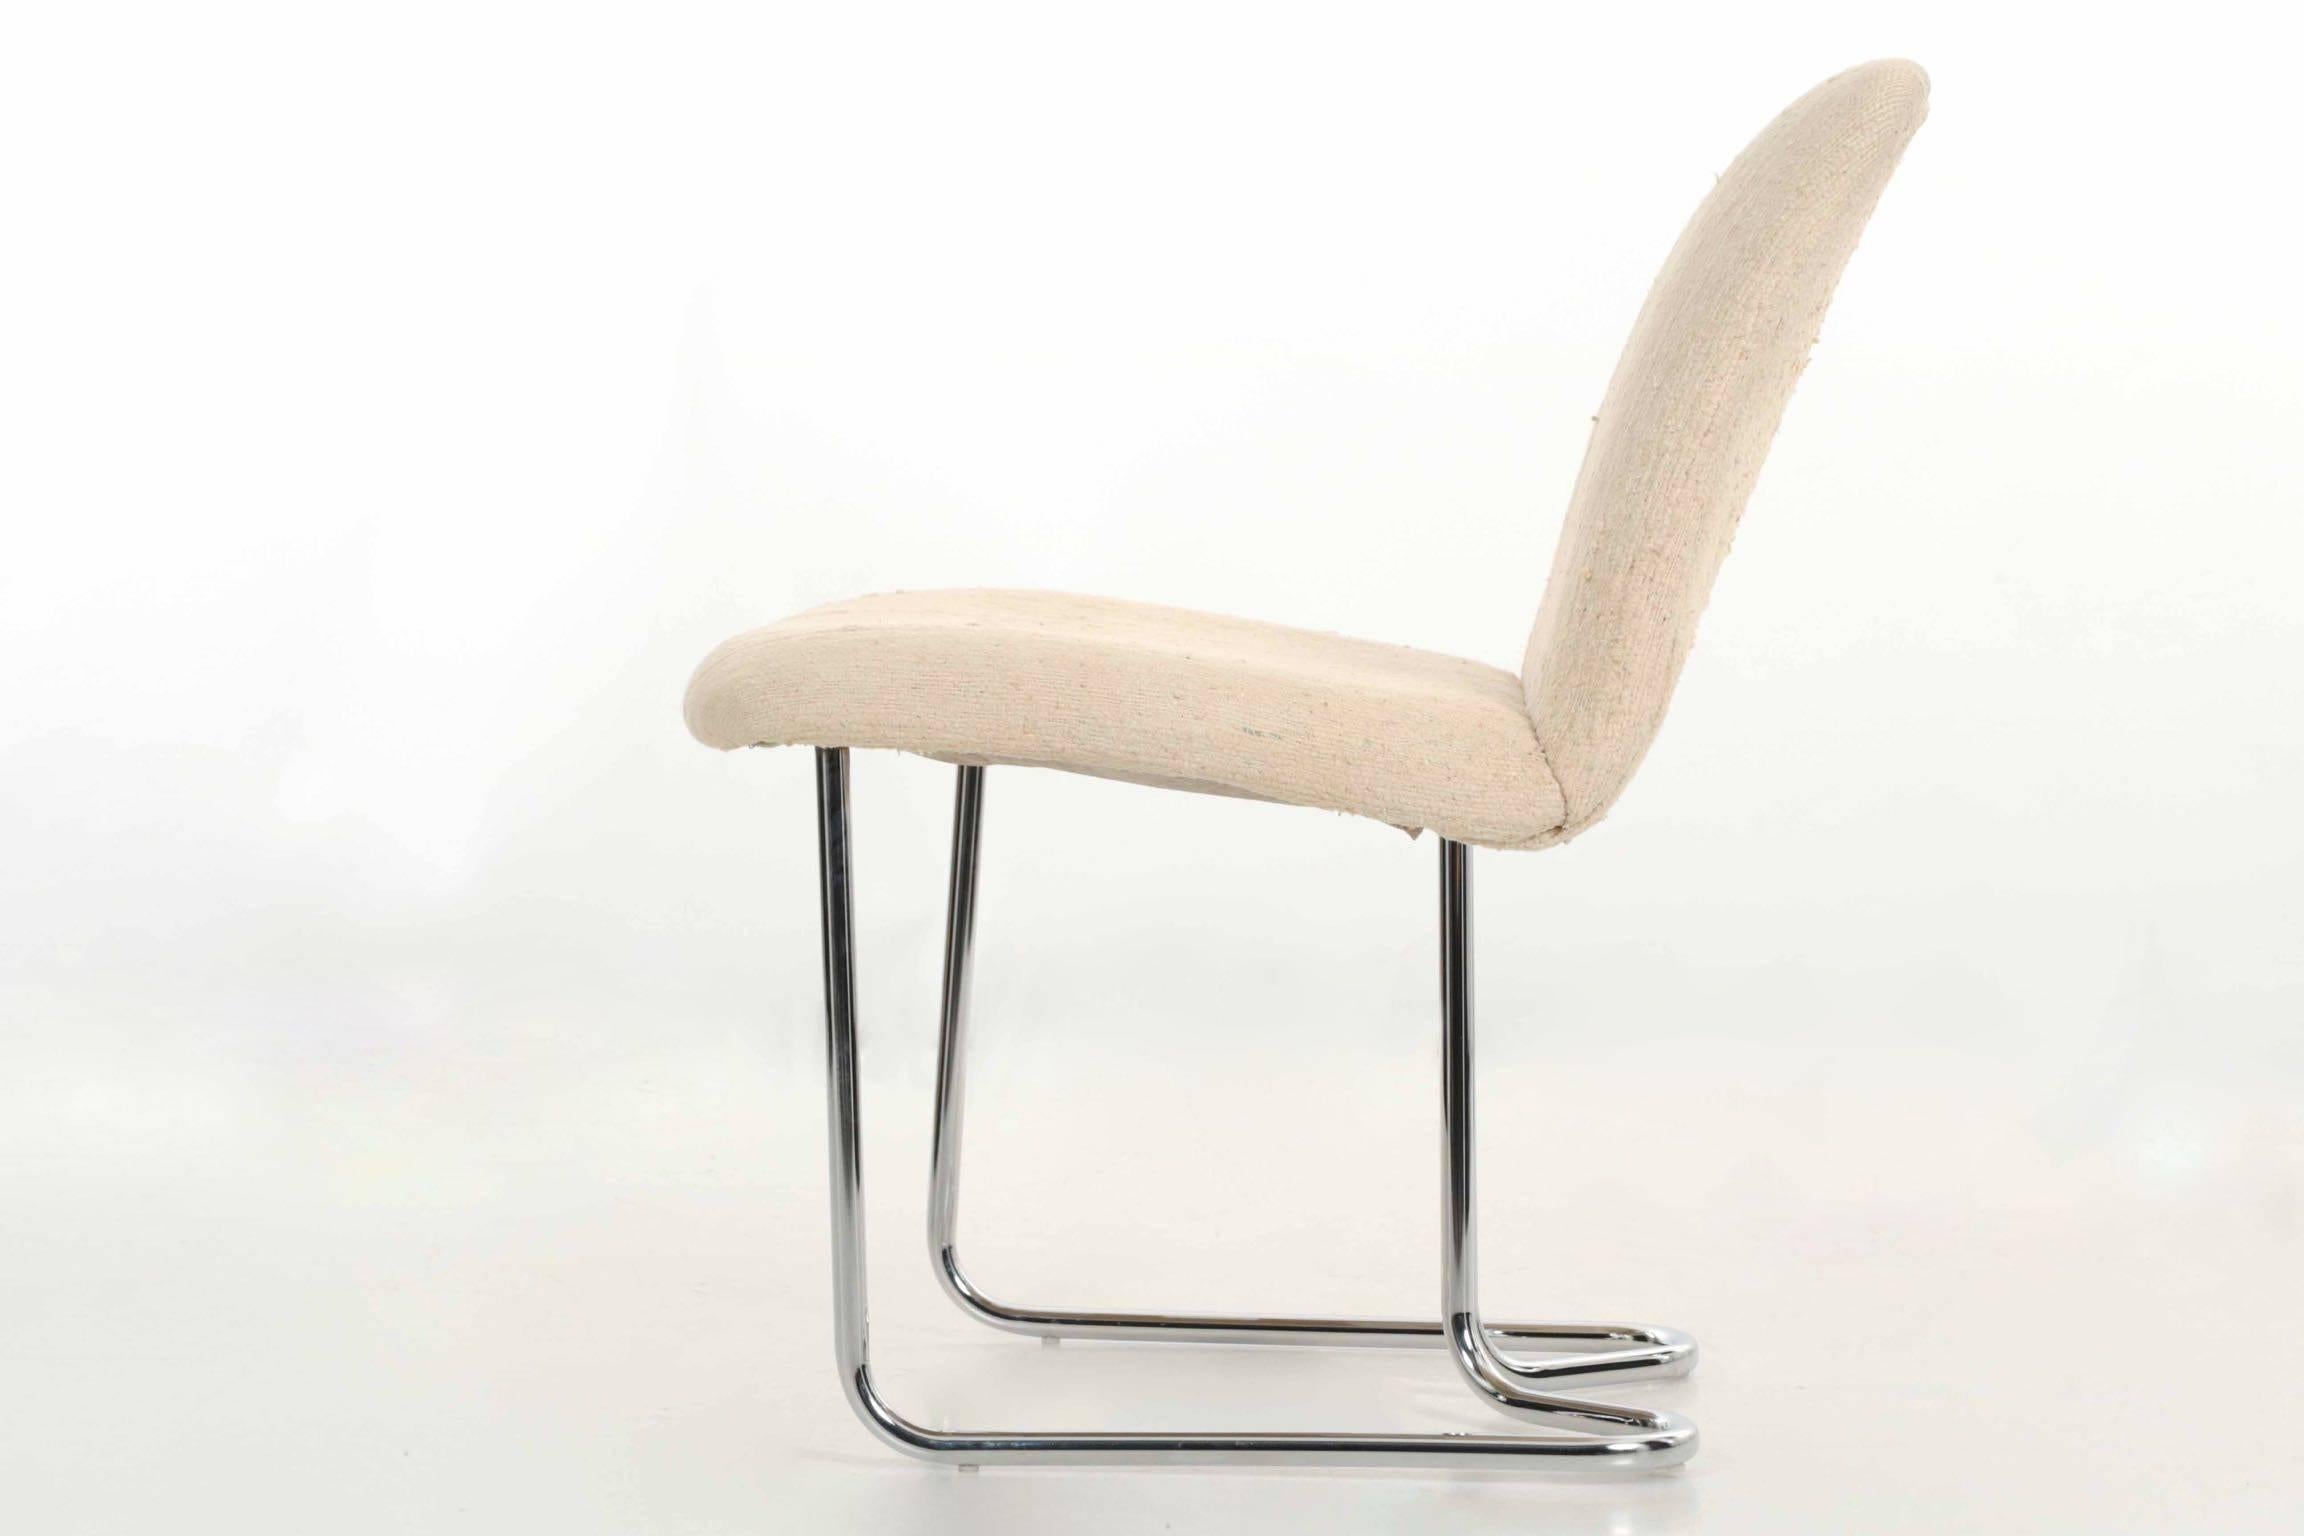 A great vintage set of four dining chairs manufactured by Design Institute America, in the 1970s, they retain their original upholstery and a high quality chromed surface. The tubular steel remains in excellent condition with only minor pitting. An